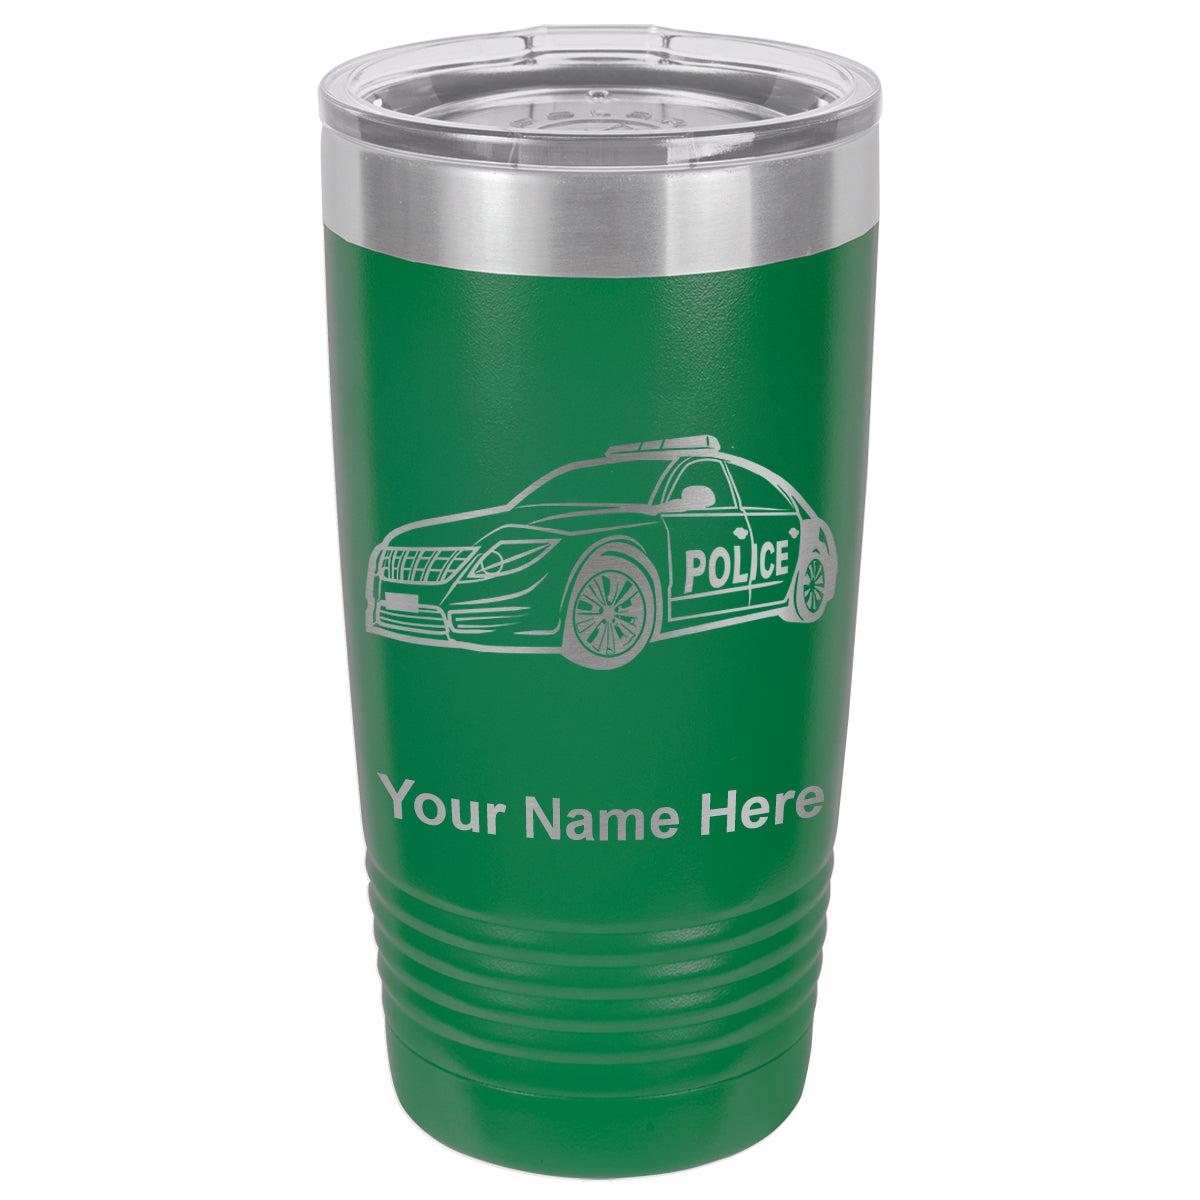 20oz Vacuum Insulated Tumbler Mug, Police Car, Personalized Engraving Included